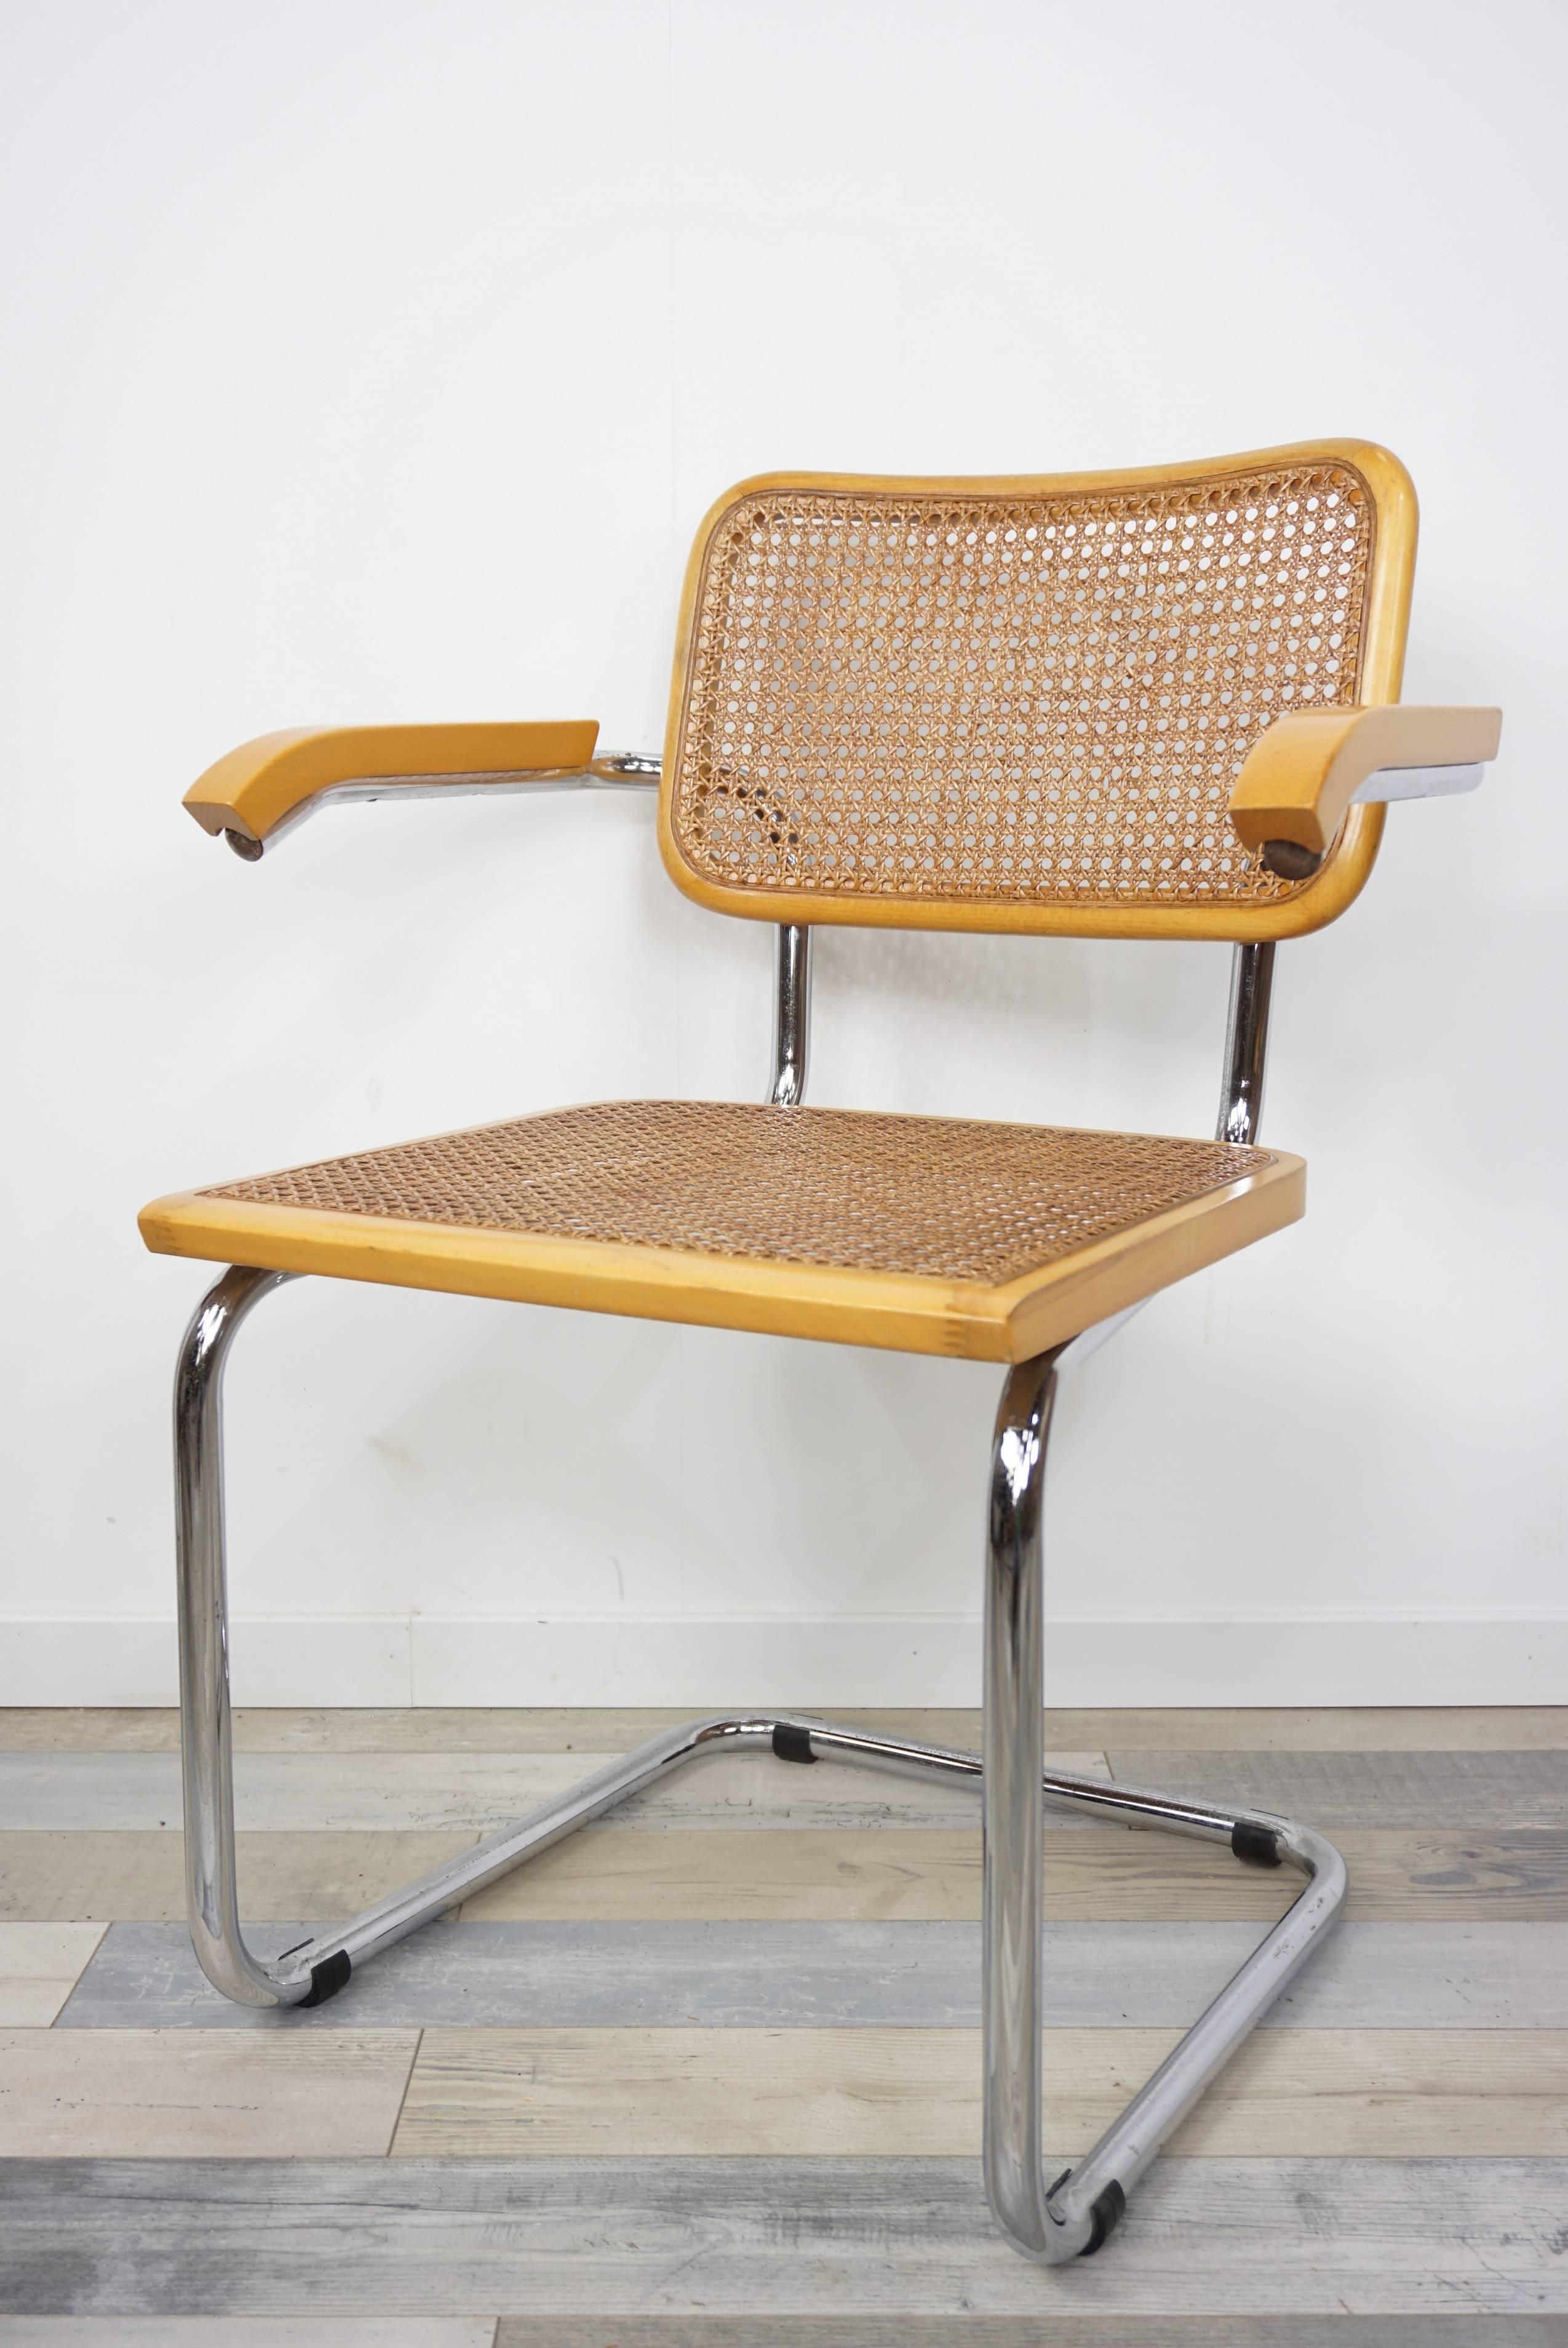 Set of six chairs Cesca B64 Marcel Breuer design, 1970s, Made in Italy, composed of a structure called 